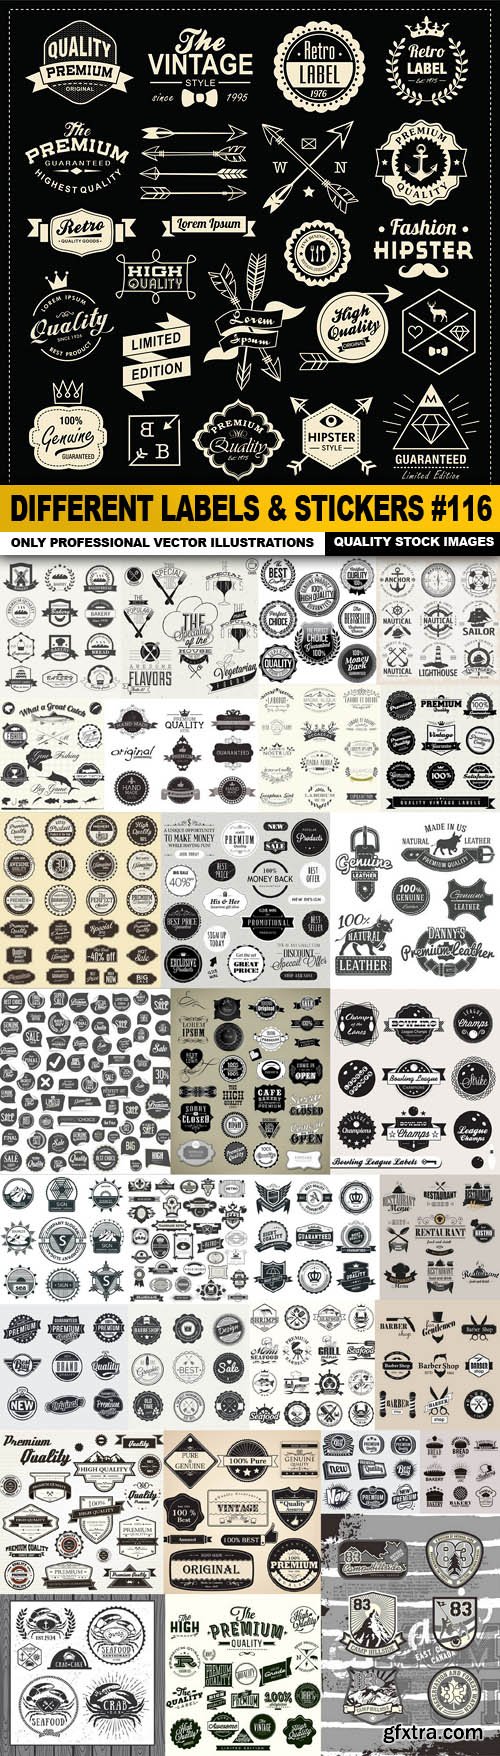 Different Labels & Stickers #116 - 30 Vector